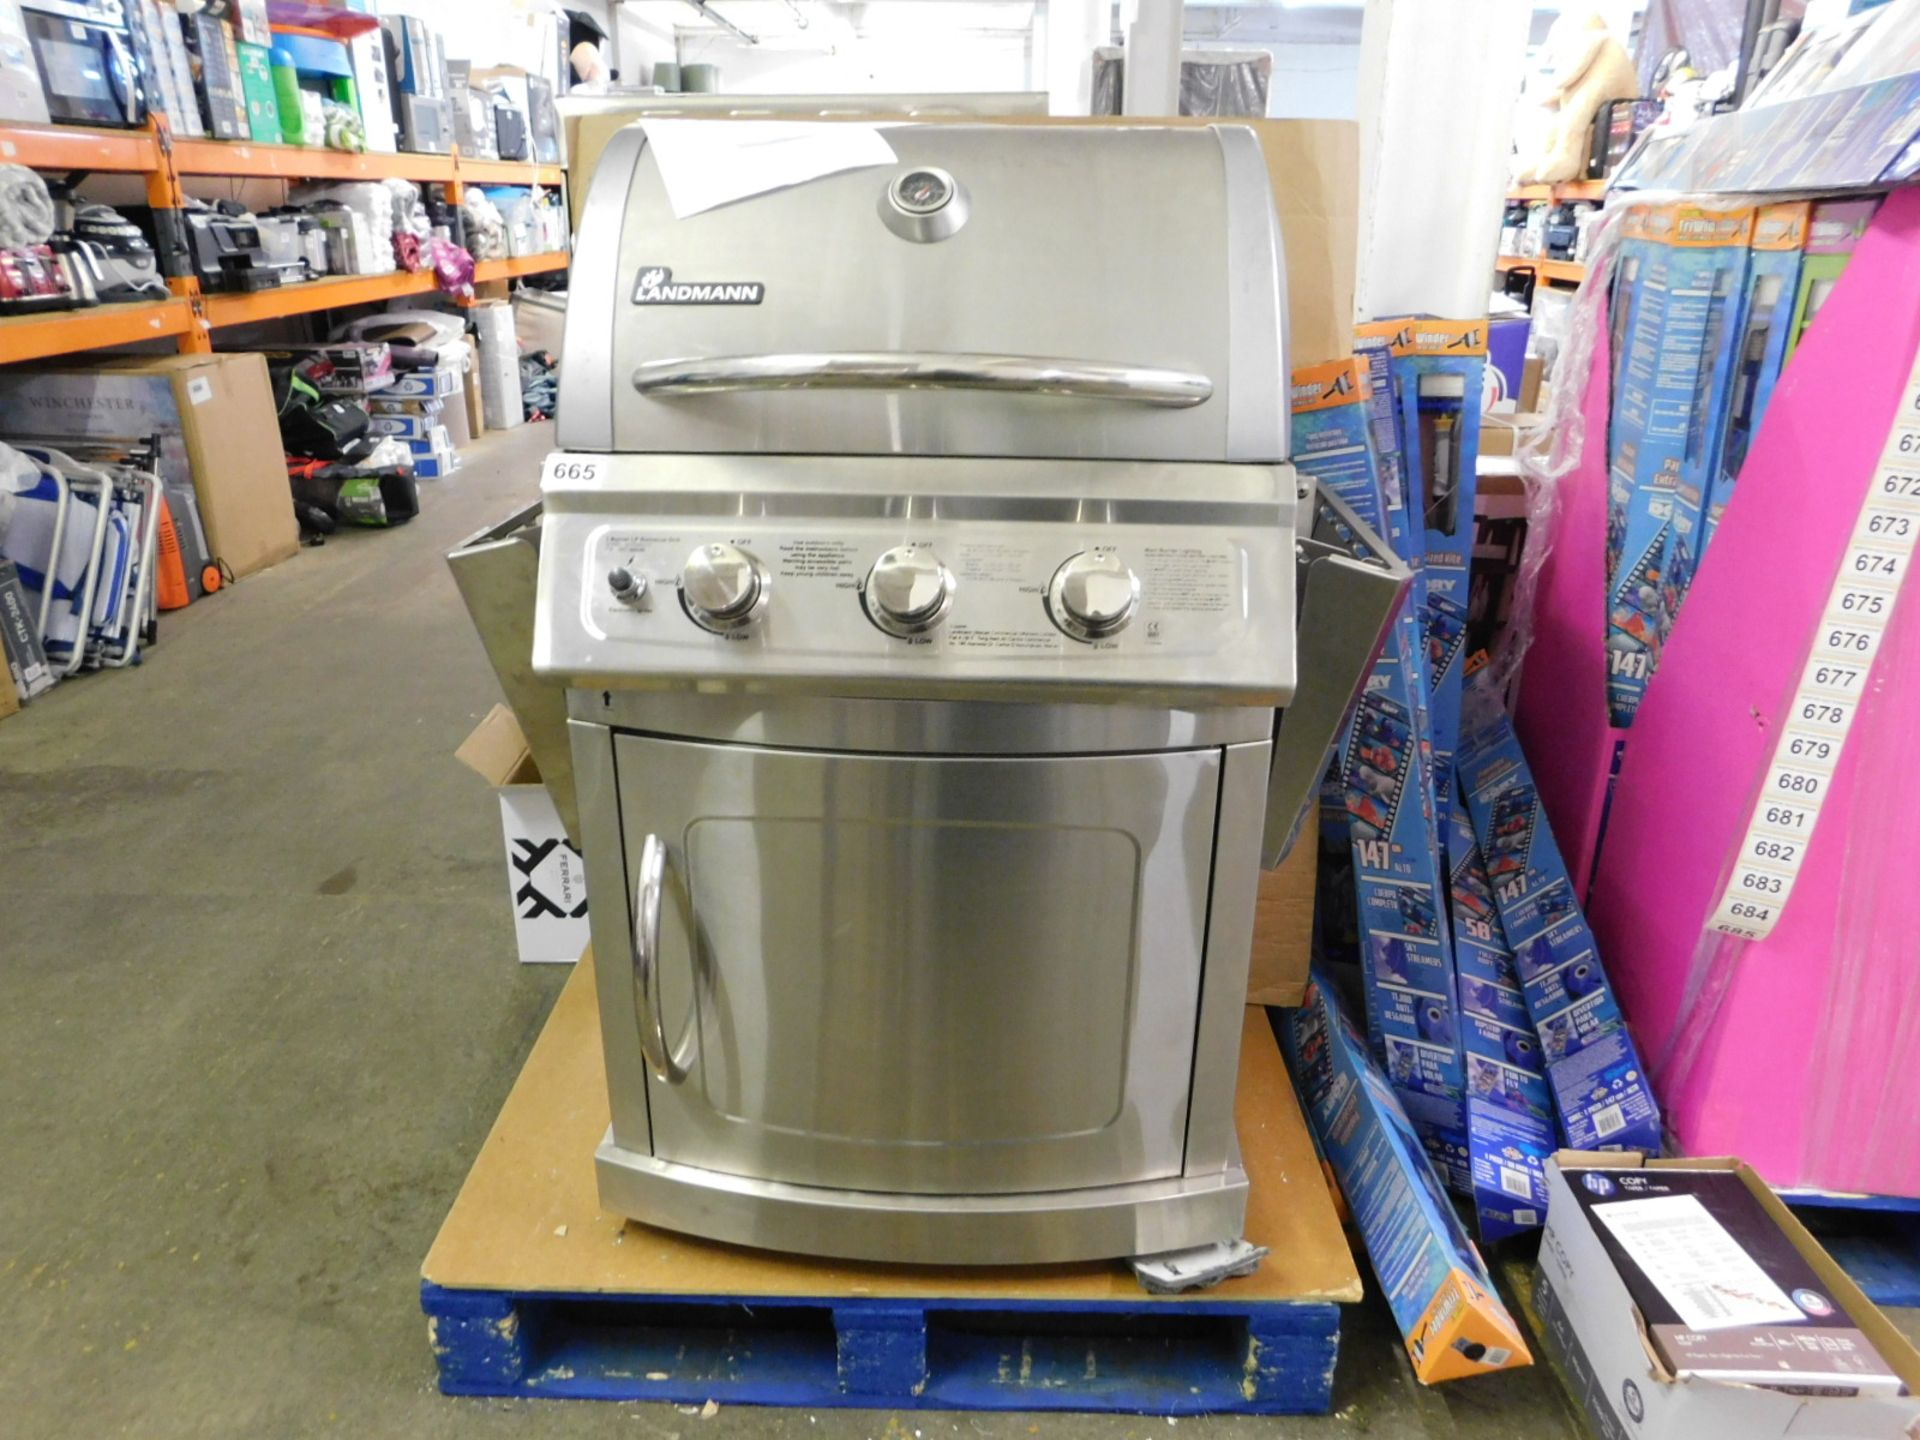 1 DURO NXR 3-BURNER 304 STAINLESS STEEL GAS BBQ WITH SIDE SEARING BURNER RRP £649